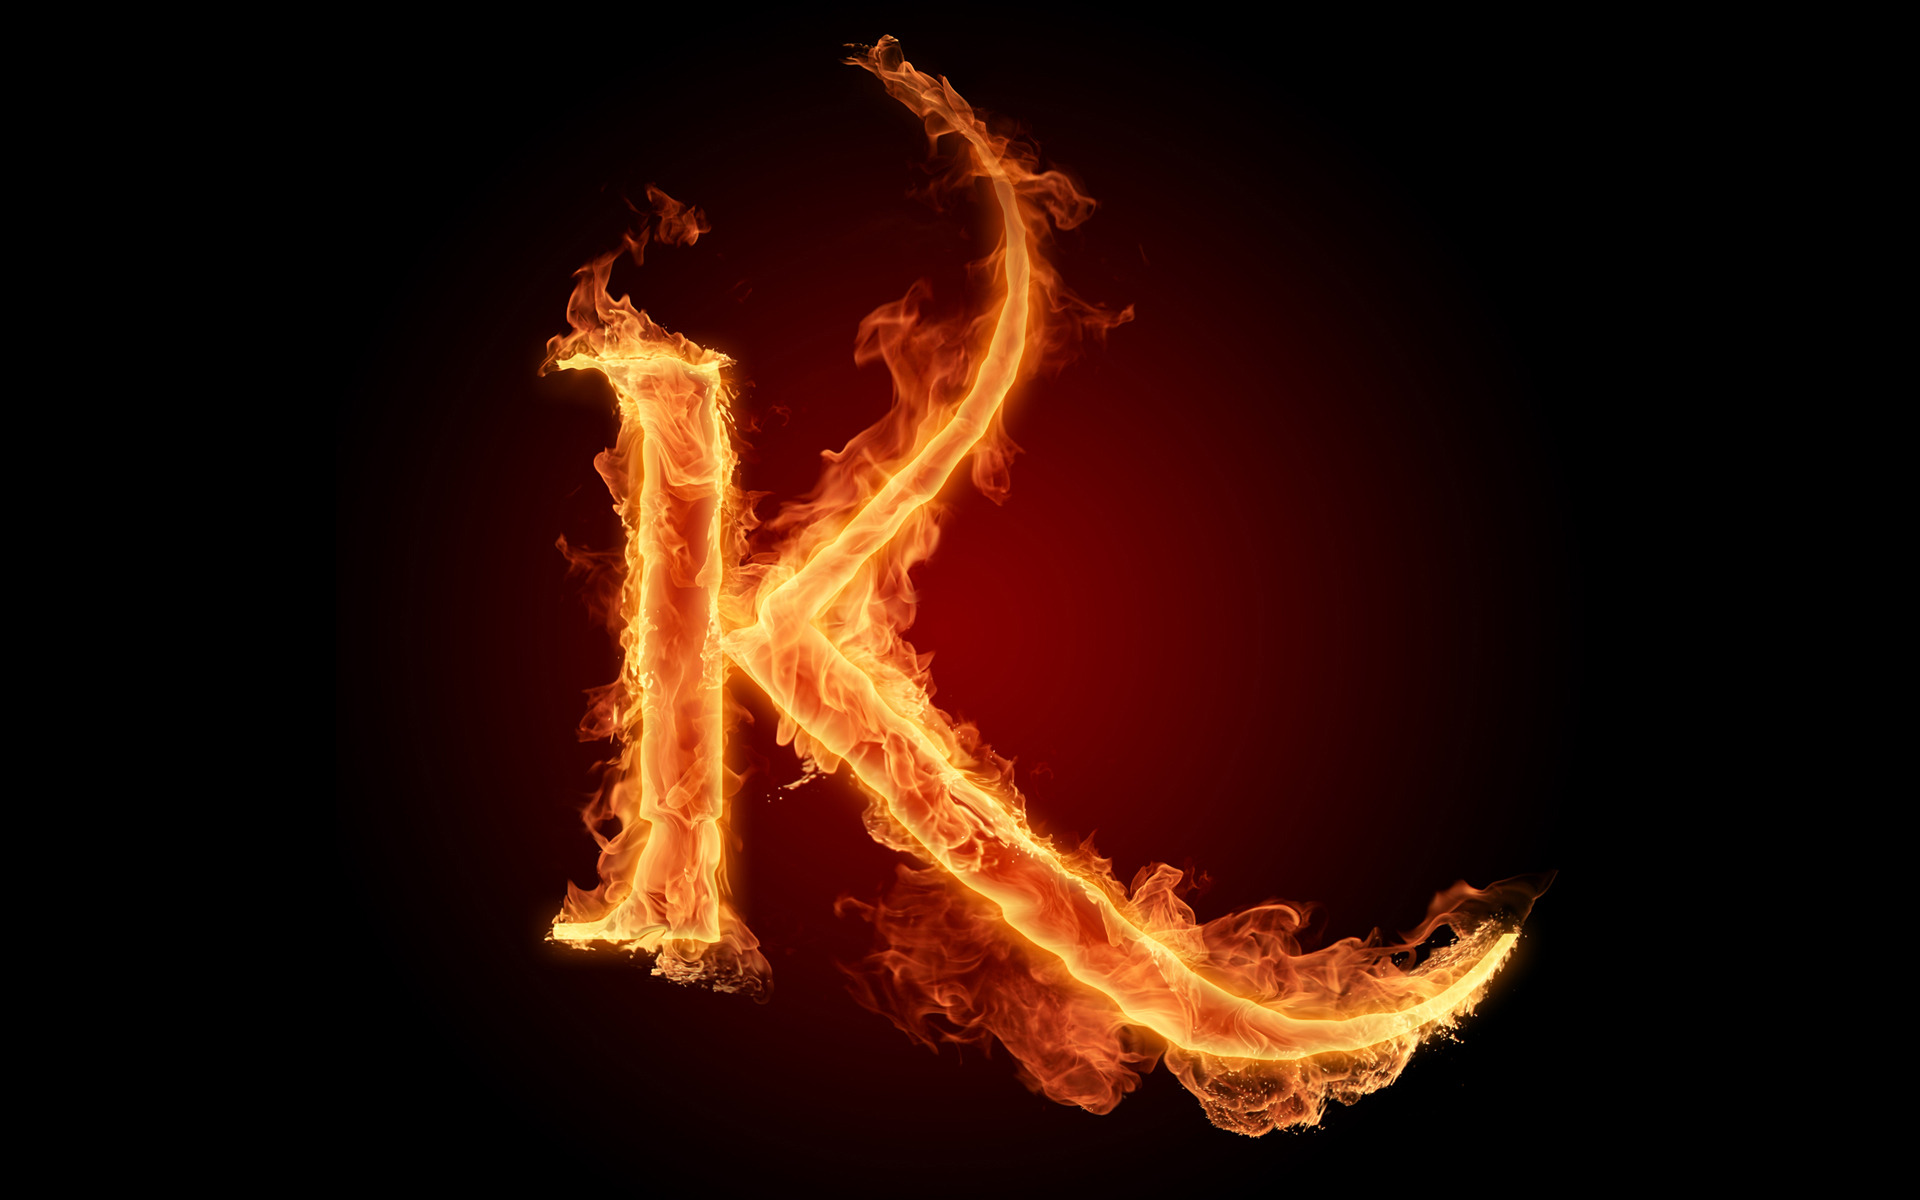 The fiery English alphabet picture K Wallpapers - HD Wallpapers 73625